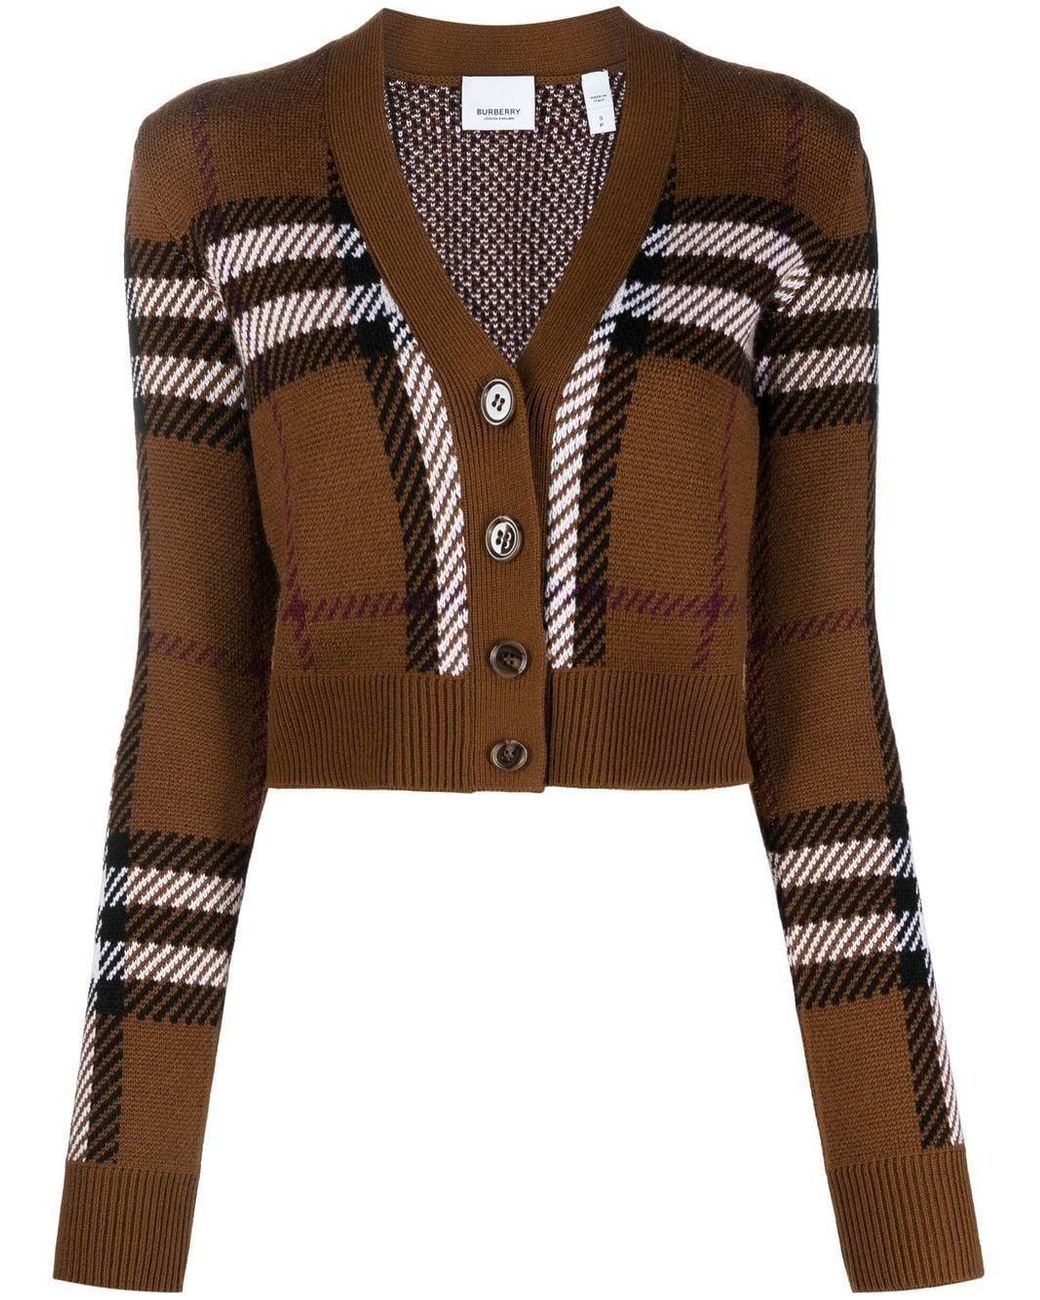 Burberry Check Wool Jacquard Cropped Cardigan in Brown | Lyst